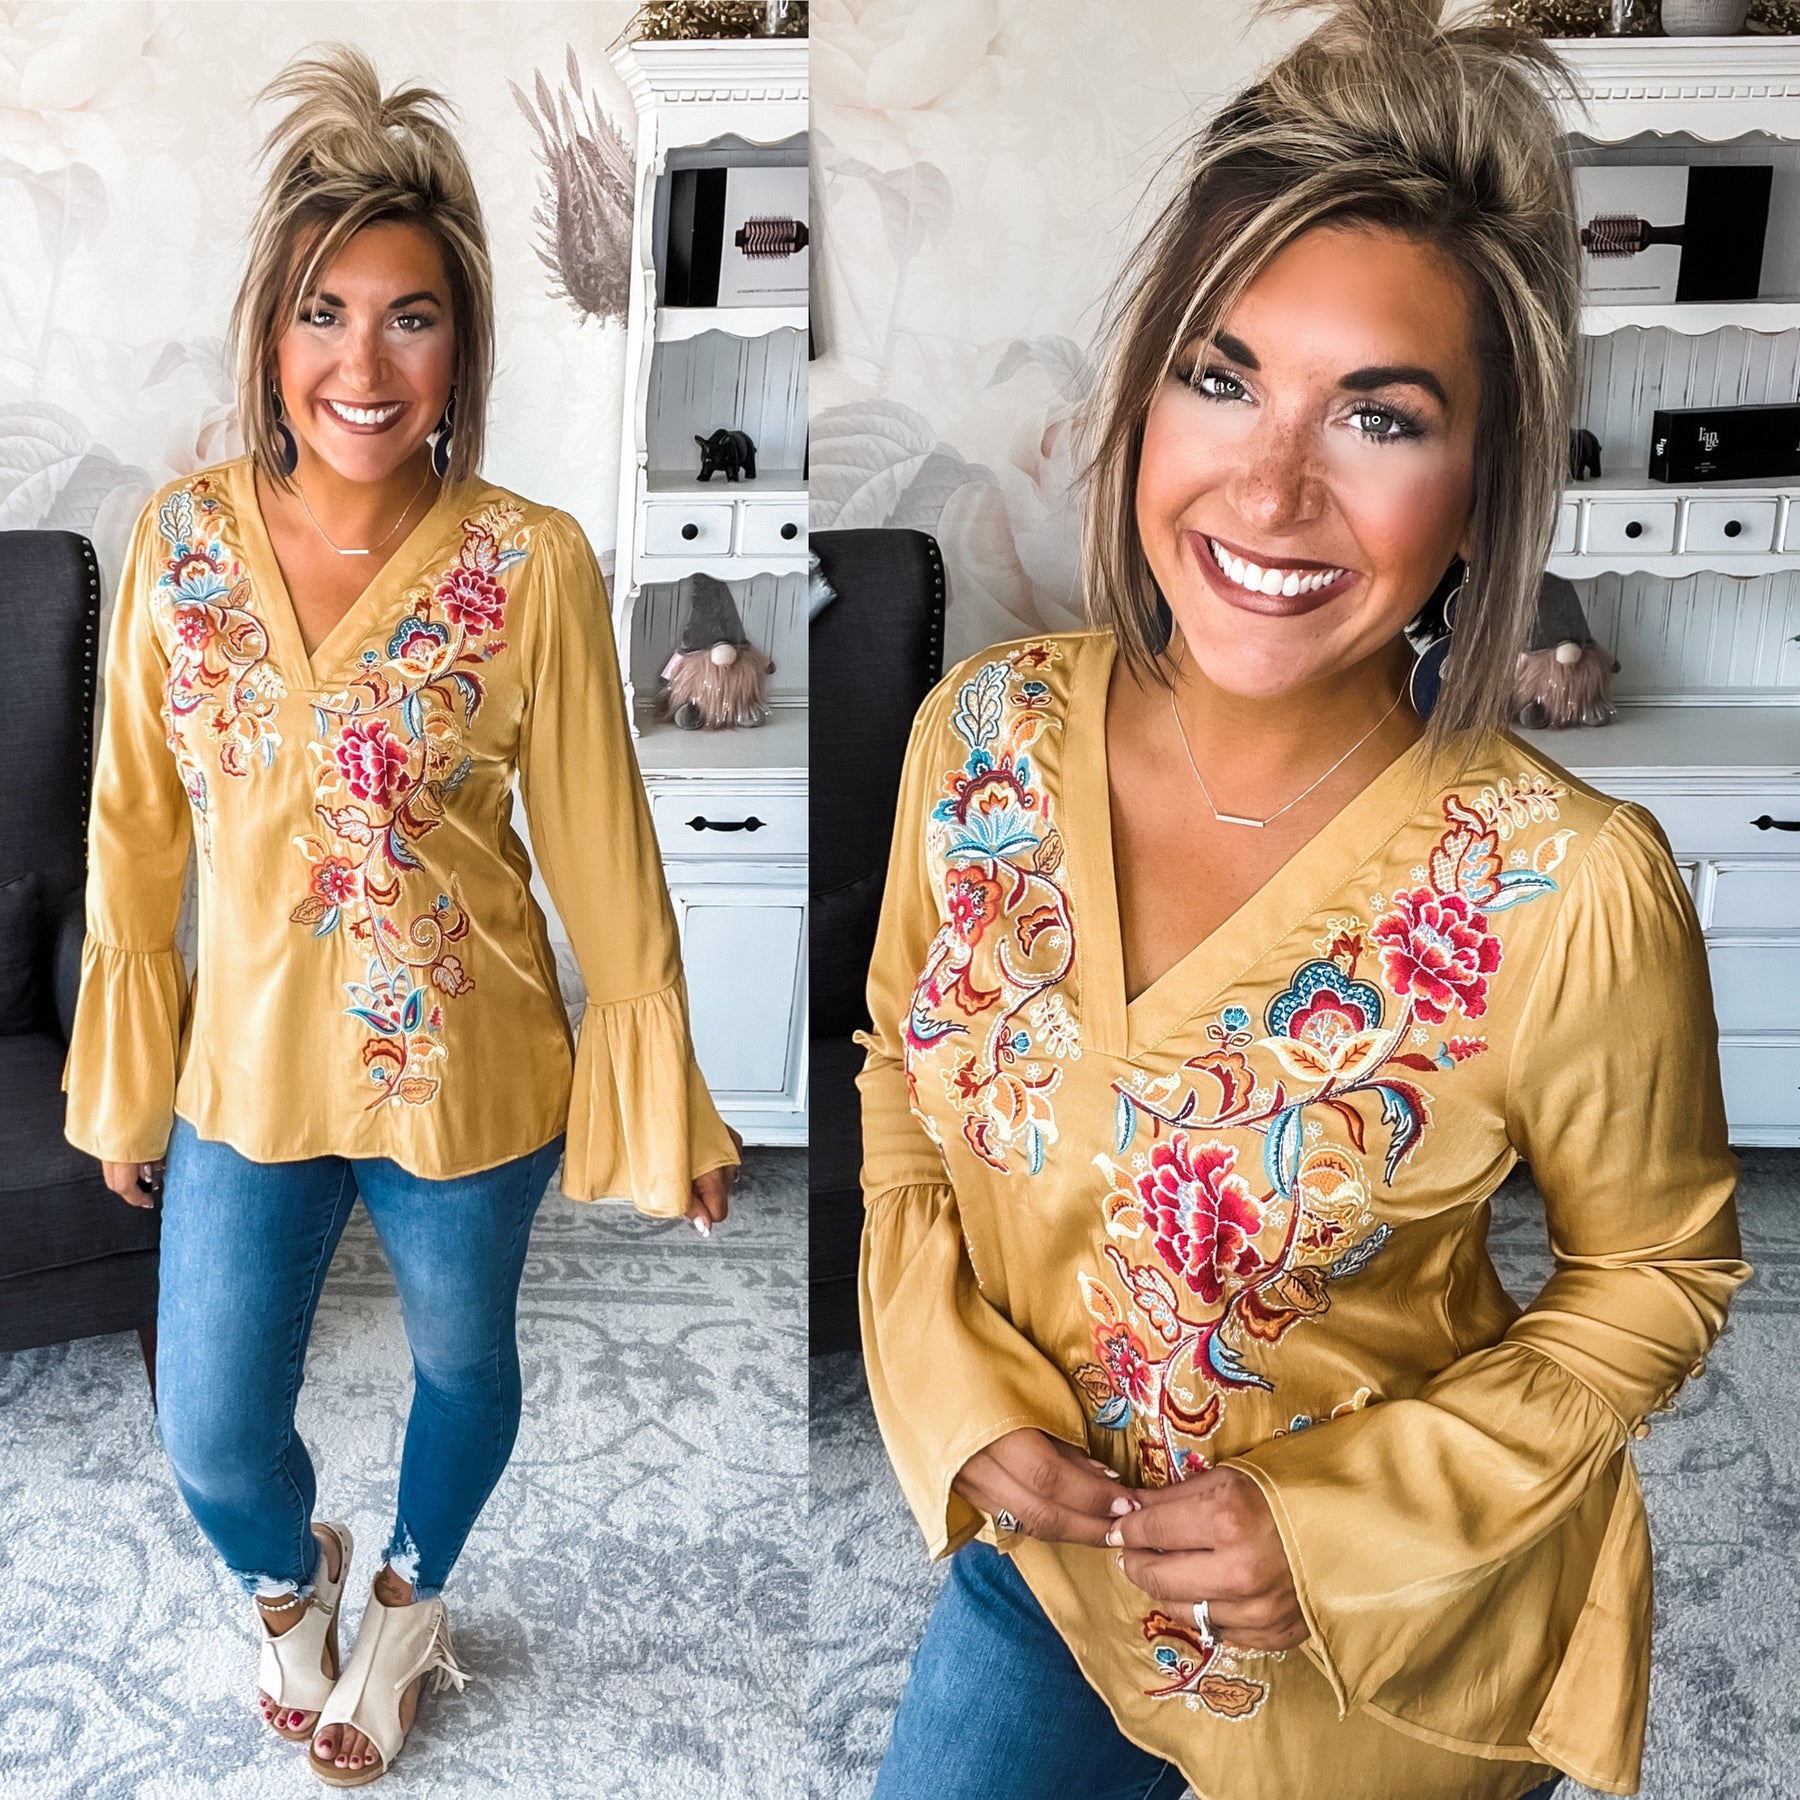 From Here On Out Blouse - Marigold